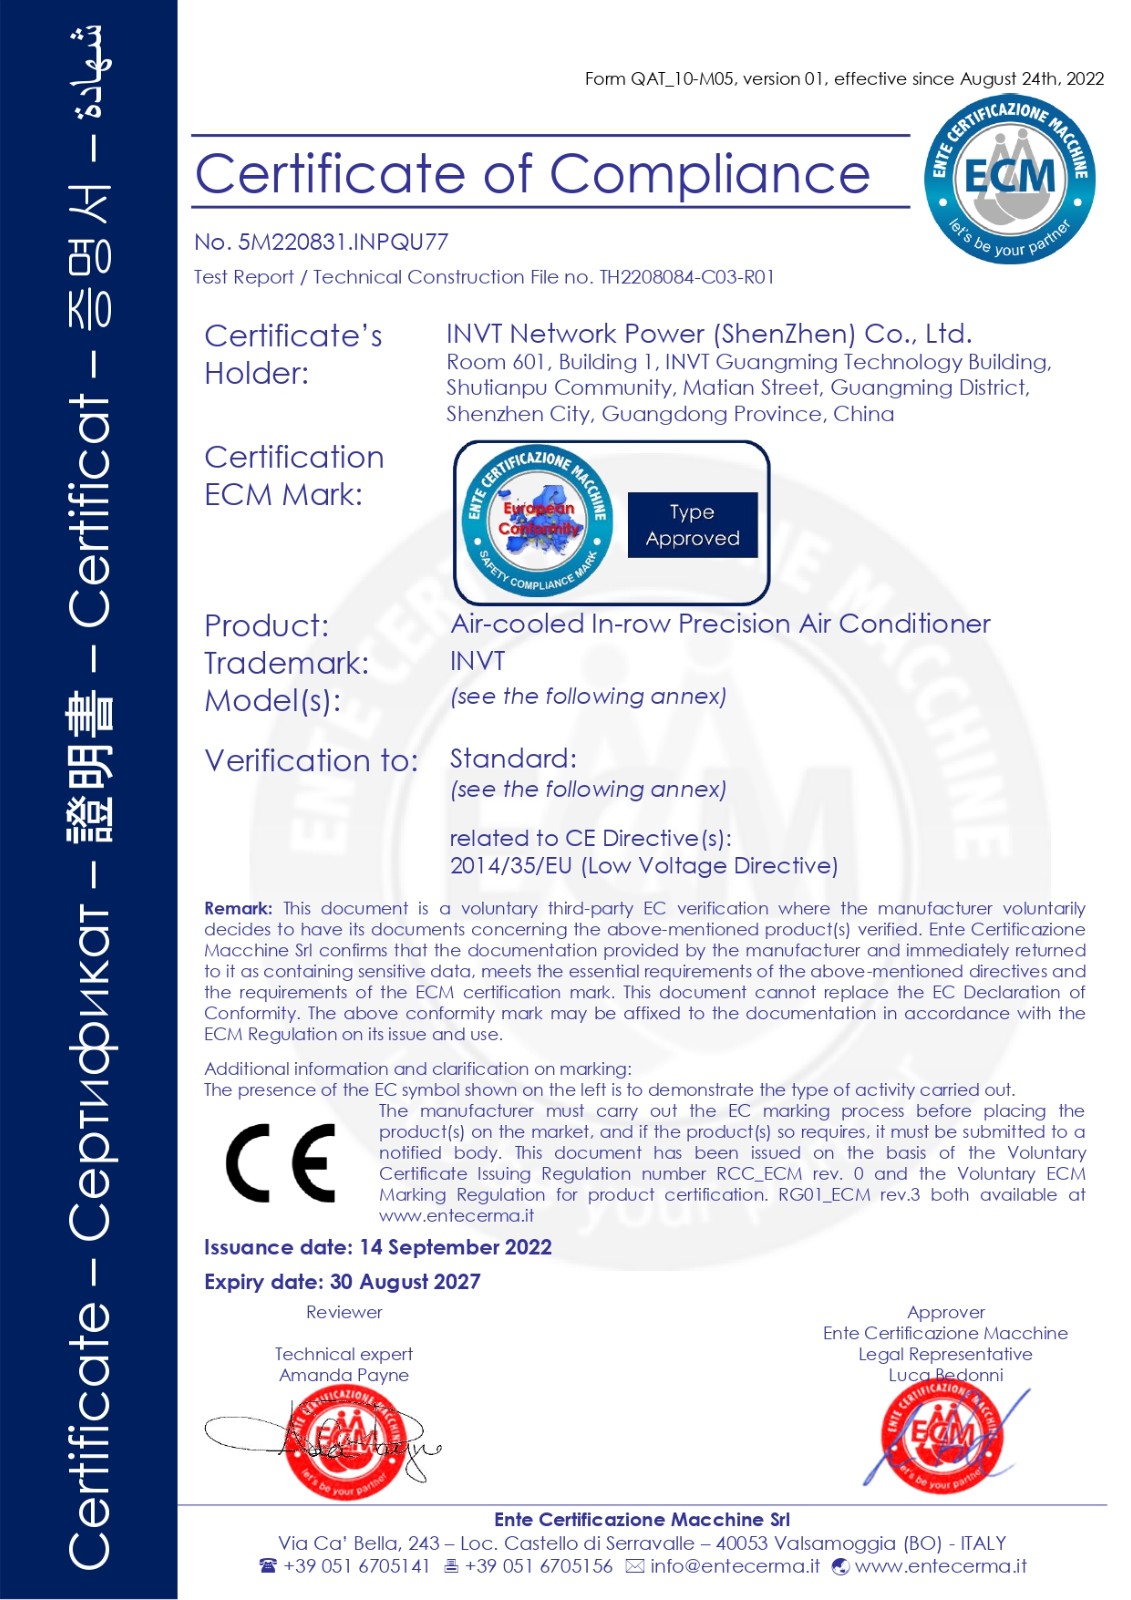 In-row air conditioner - LVD Certification   5M220831.INPQU77_page-0001.jpg